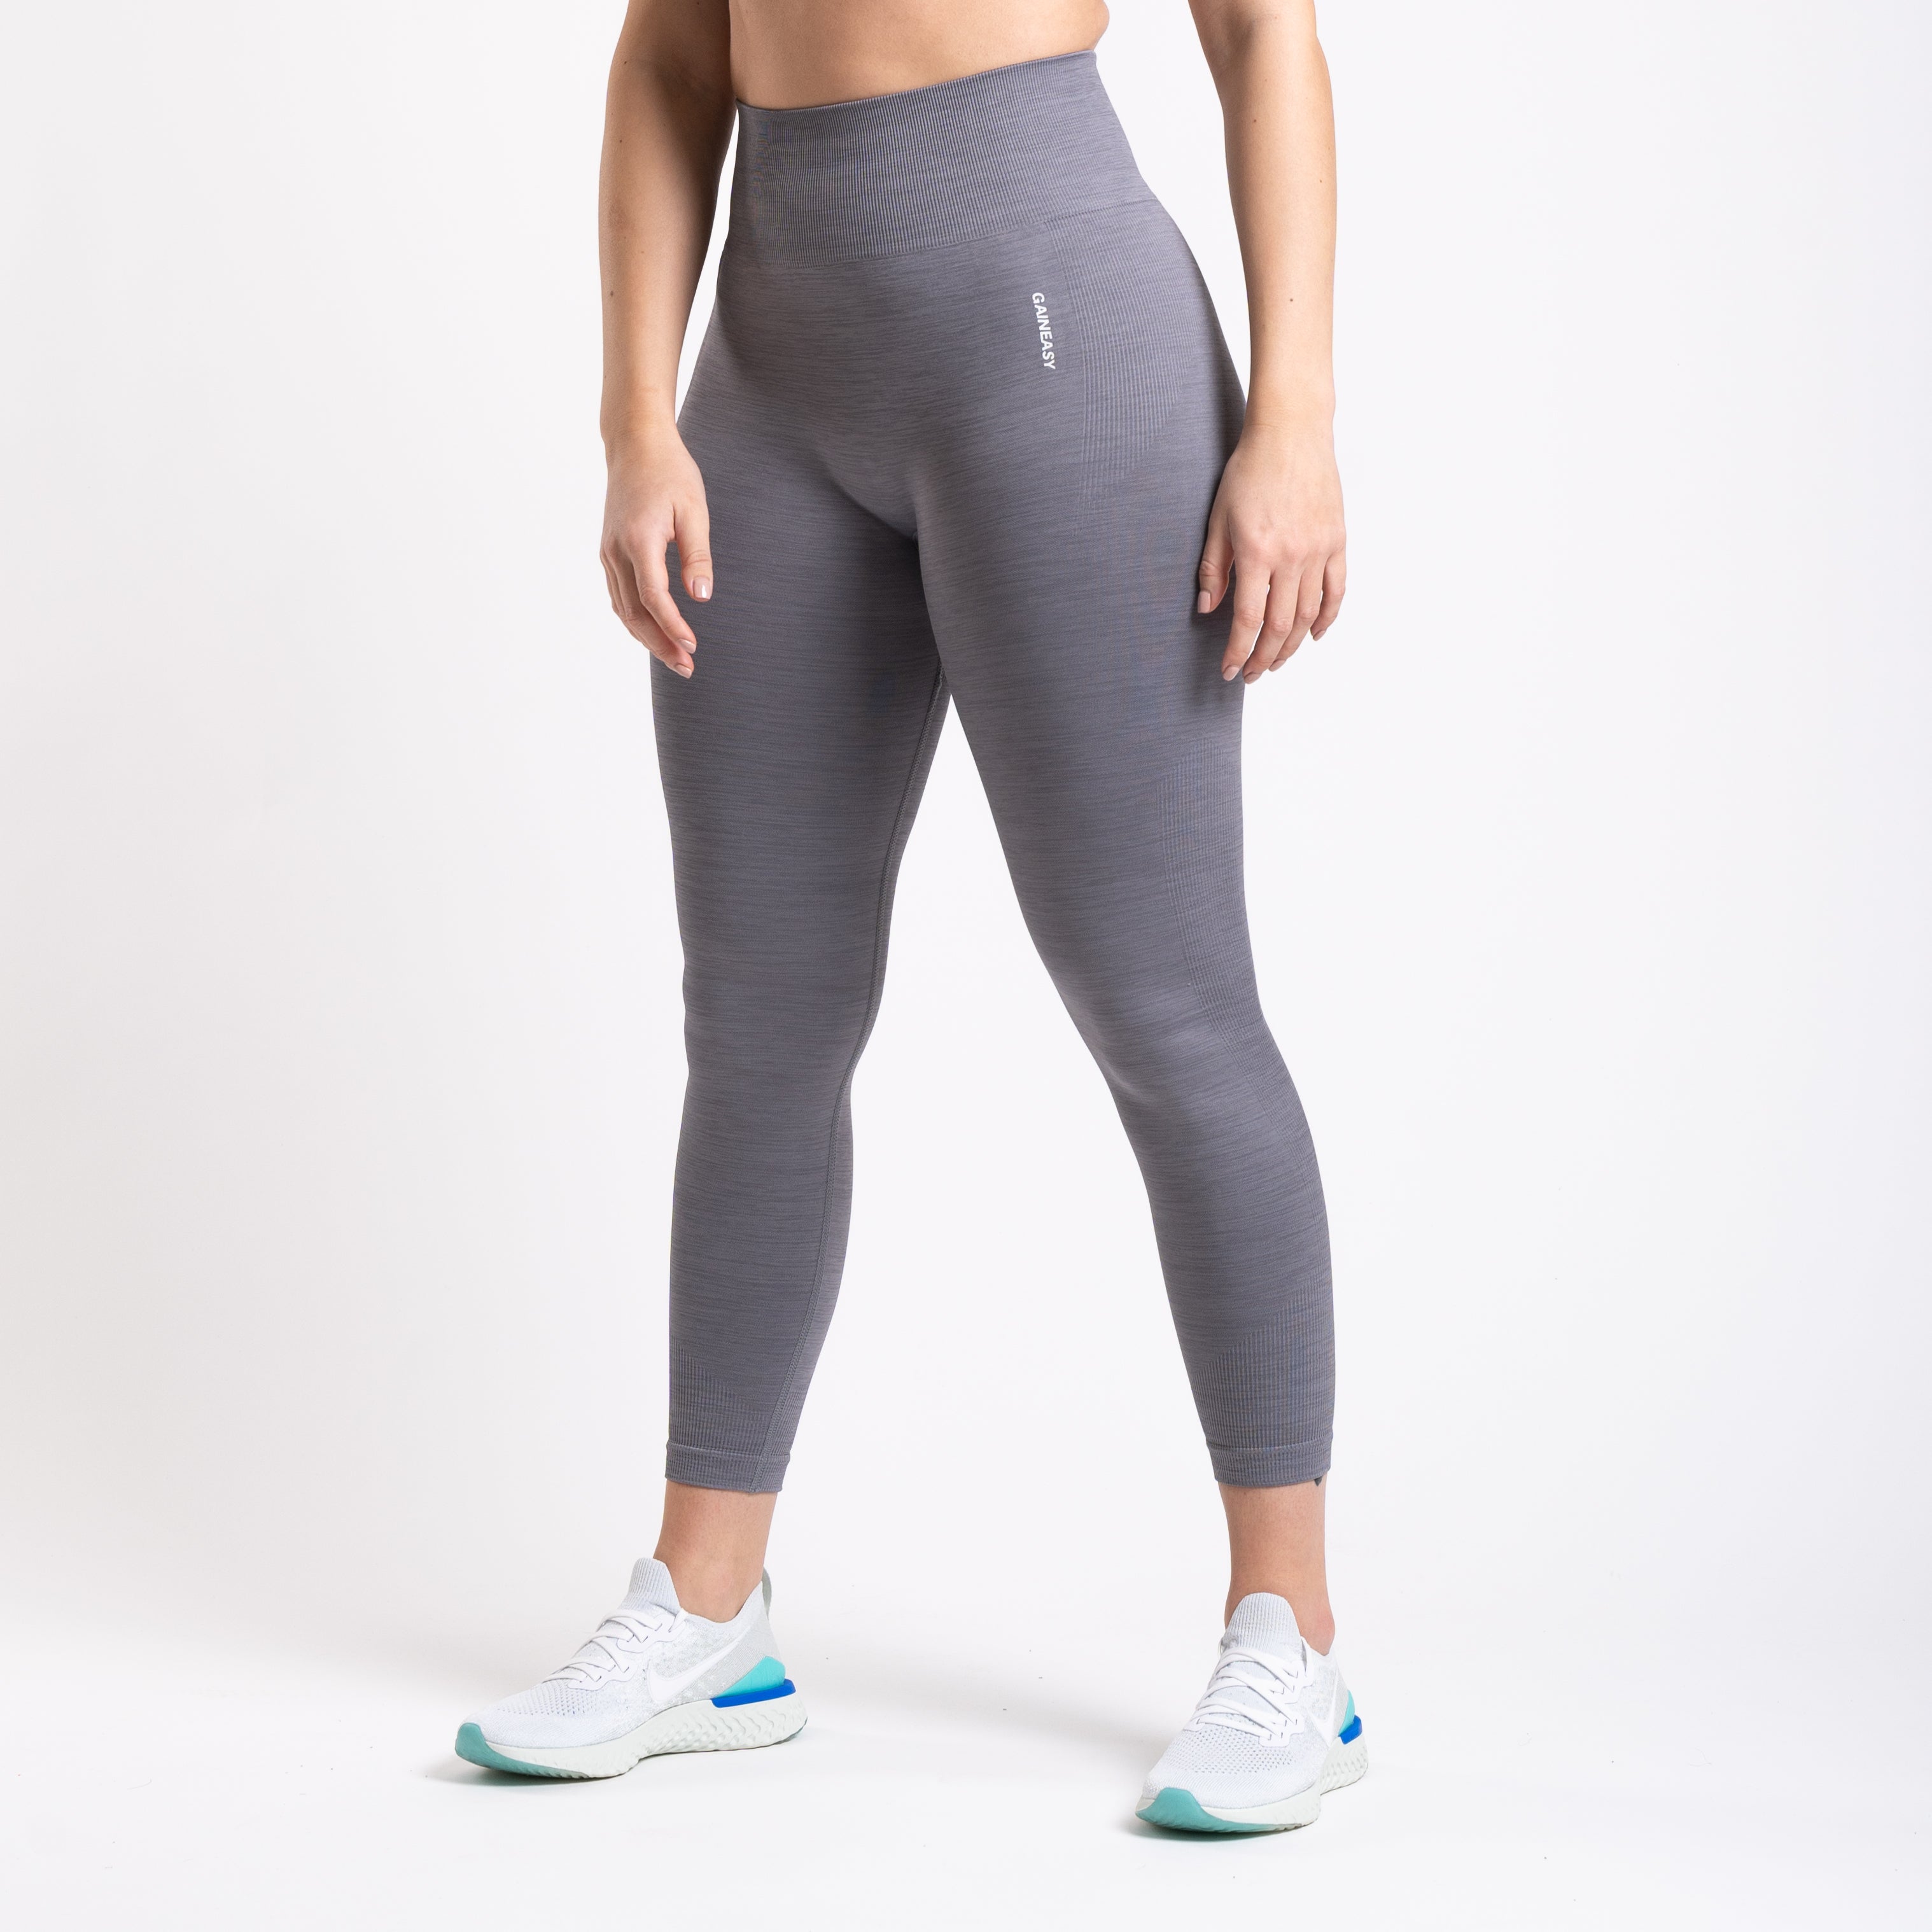 WHAT ARE SEAMLESS LEGGINGS?